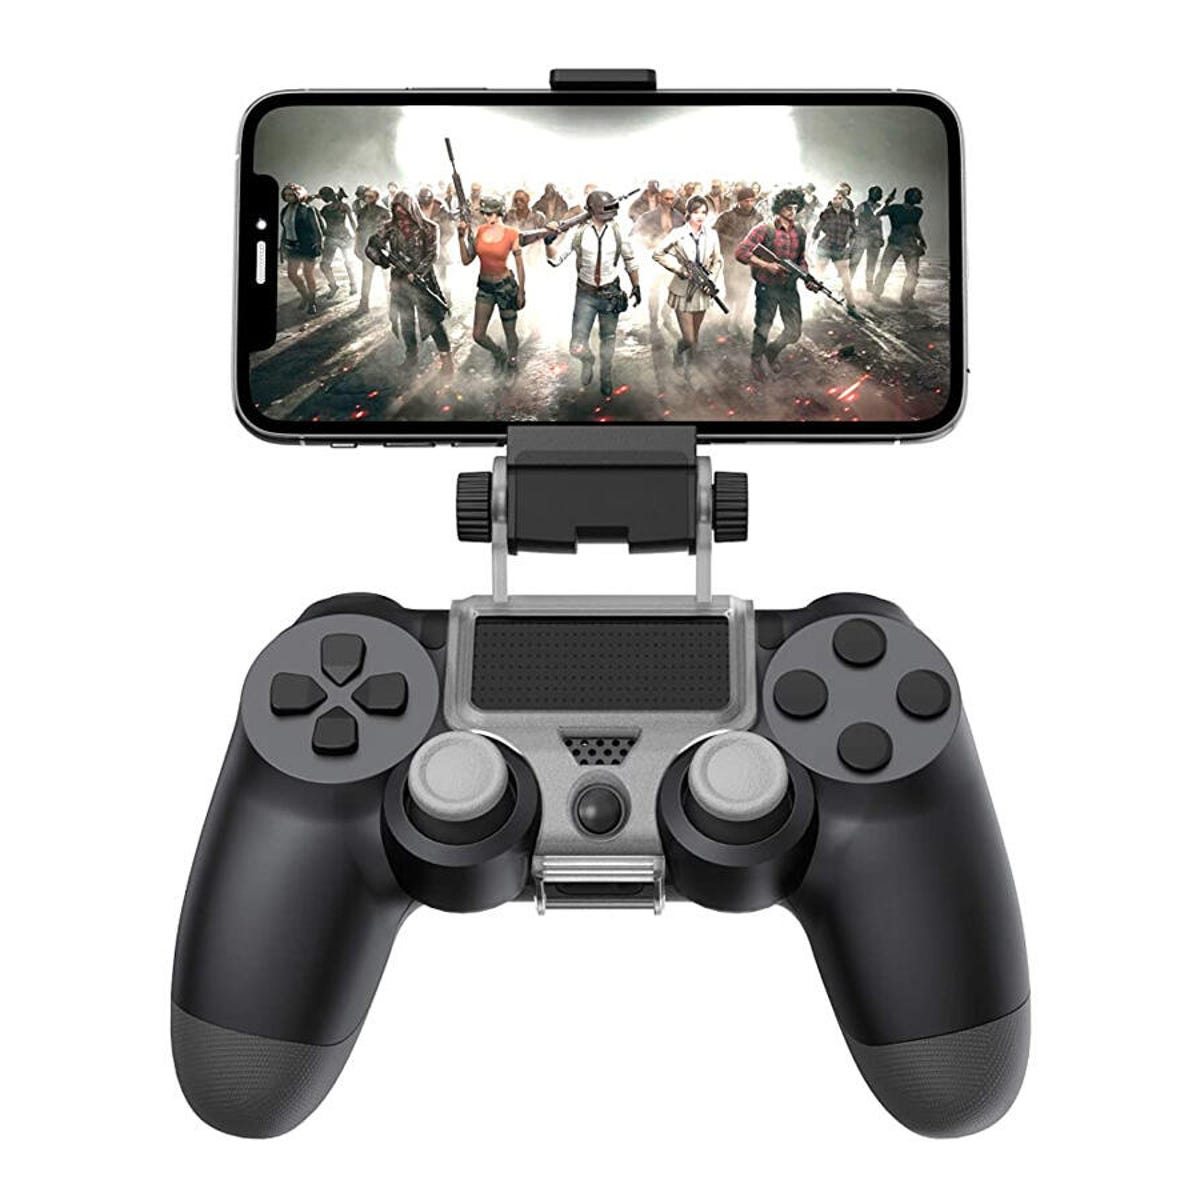 Algebraïsch Succesvol Duur How to connect a PlayStation 4 controller to your iPhone | ZDNET